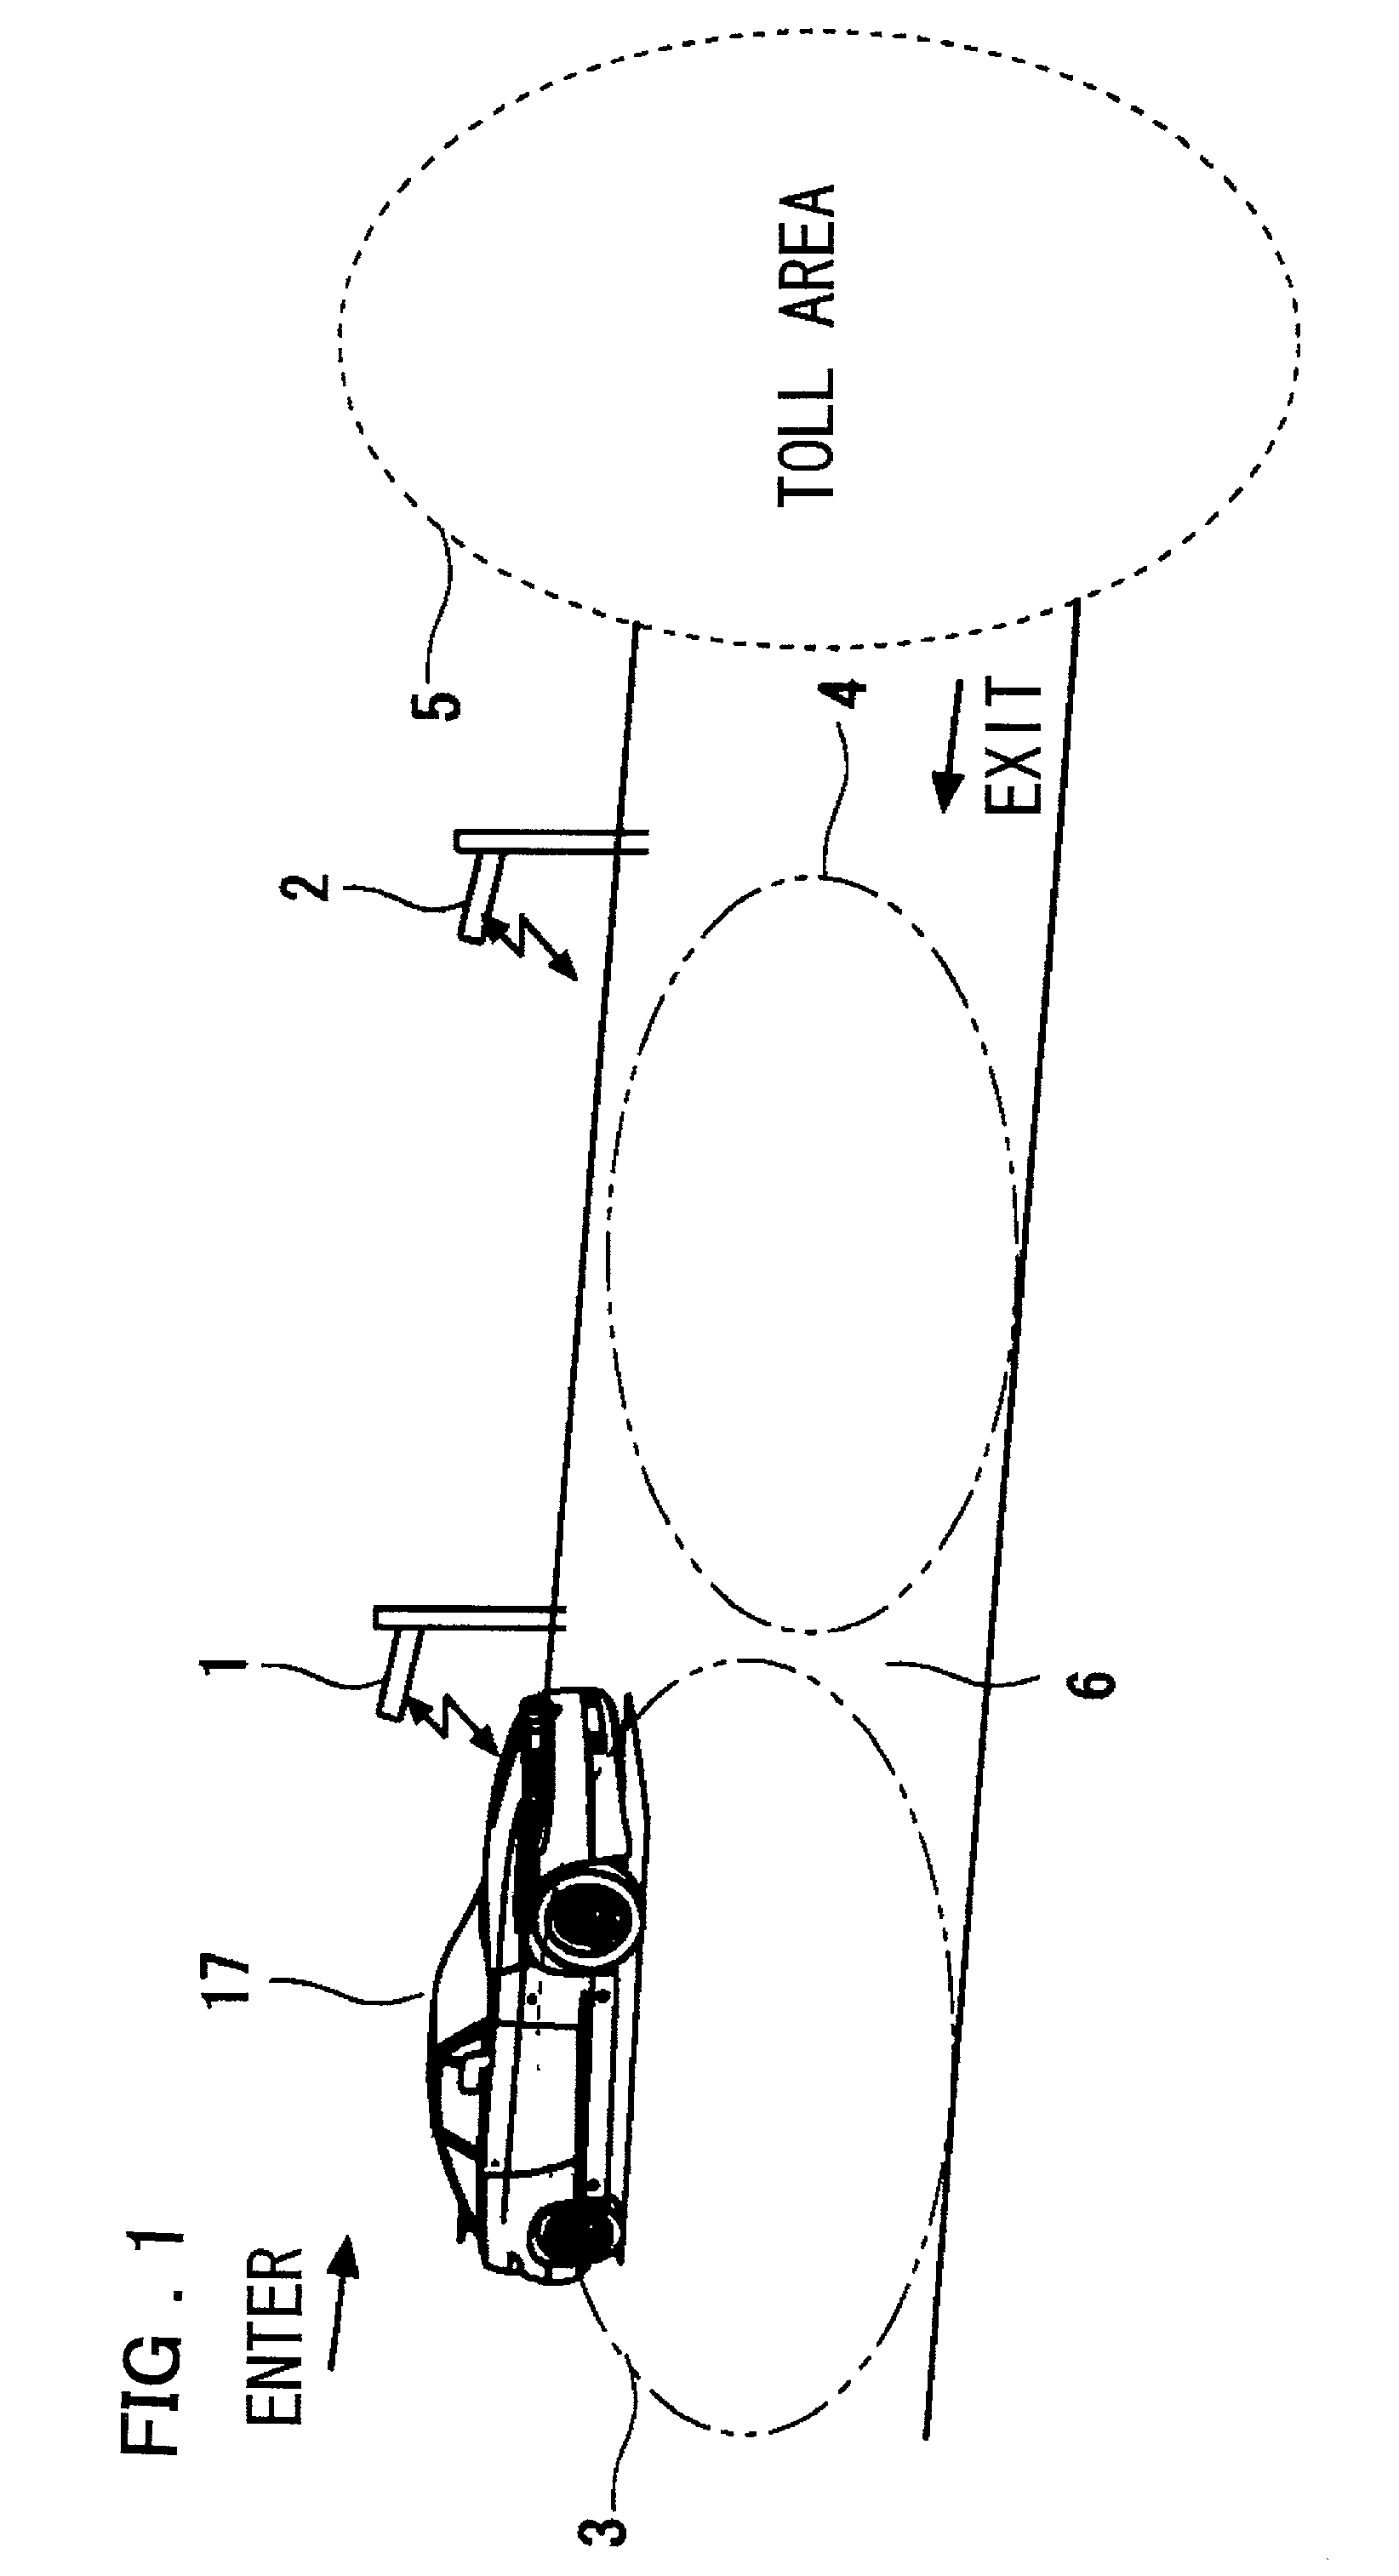 Non-stop toll collection method and system